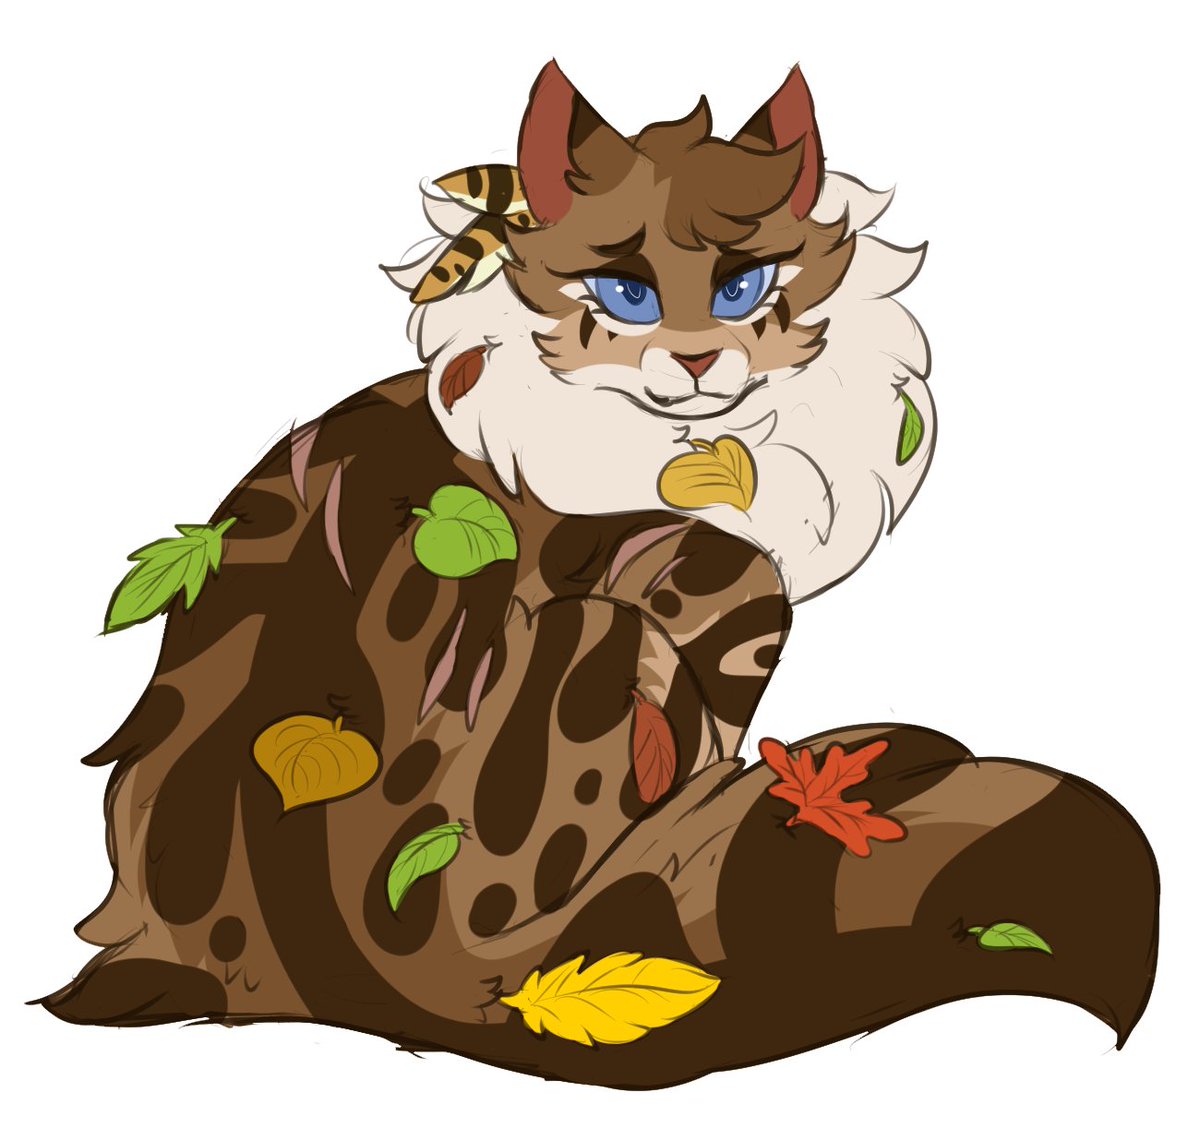 Lakeflame, she's native coded. She likes to decorate her fur with leaves and is typically seen with owl feathers as well from a self-inflicted rite of passage to honor how she became a warrior!